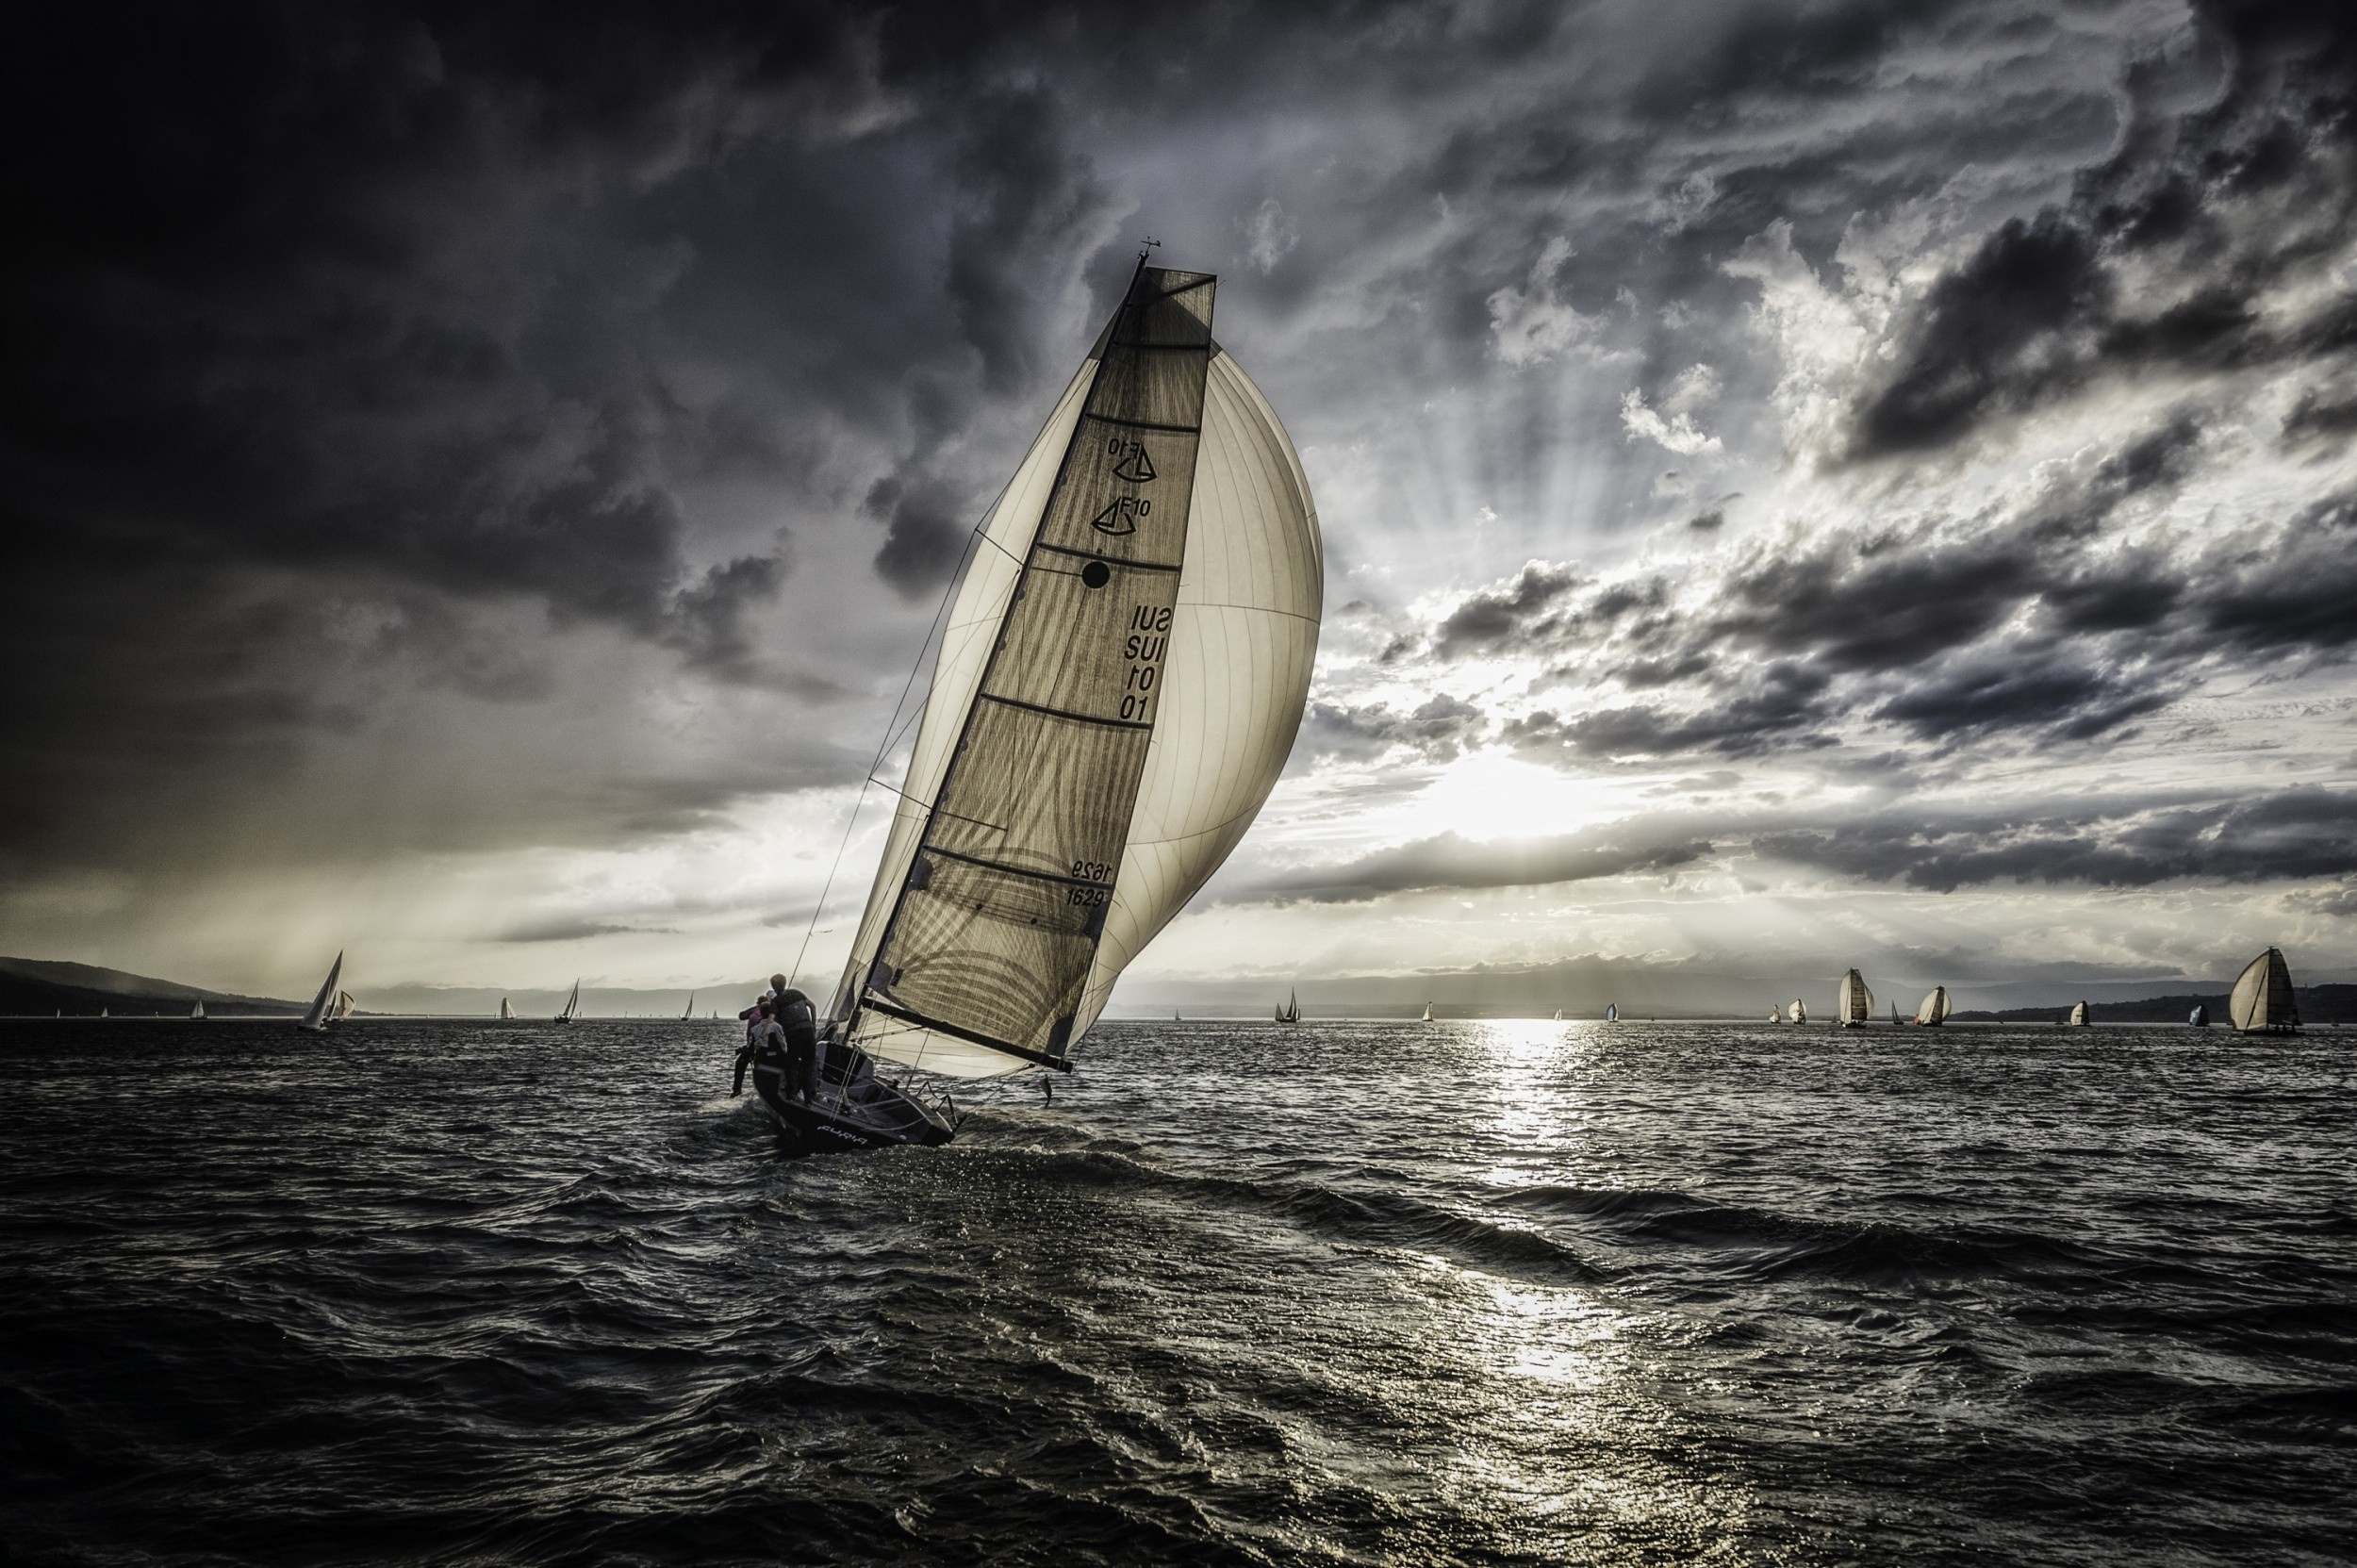 Yacht Racing: Water sports, Sailing, A contest between crews of people in sailboats. 2500x1670 HD Wallpaper.